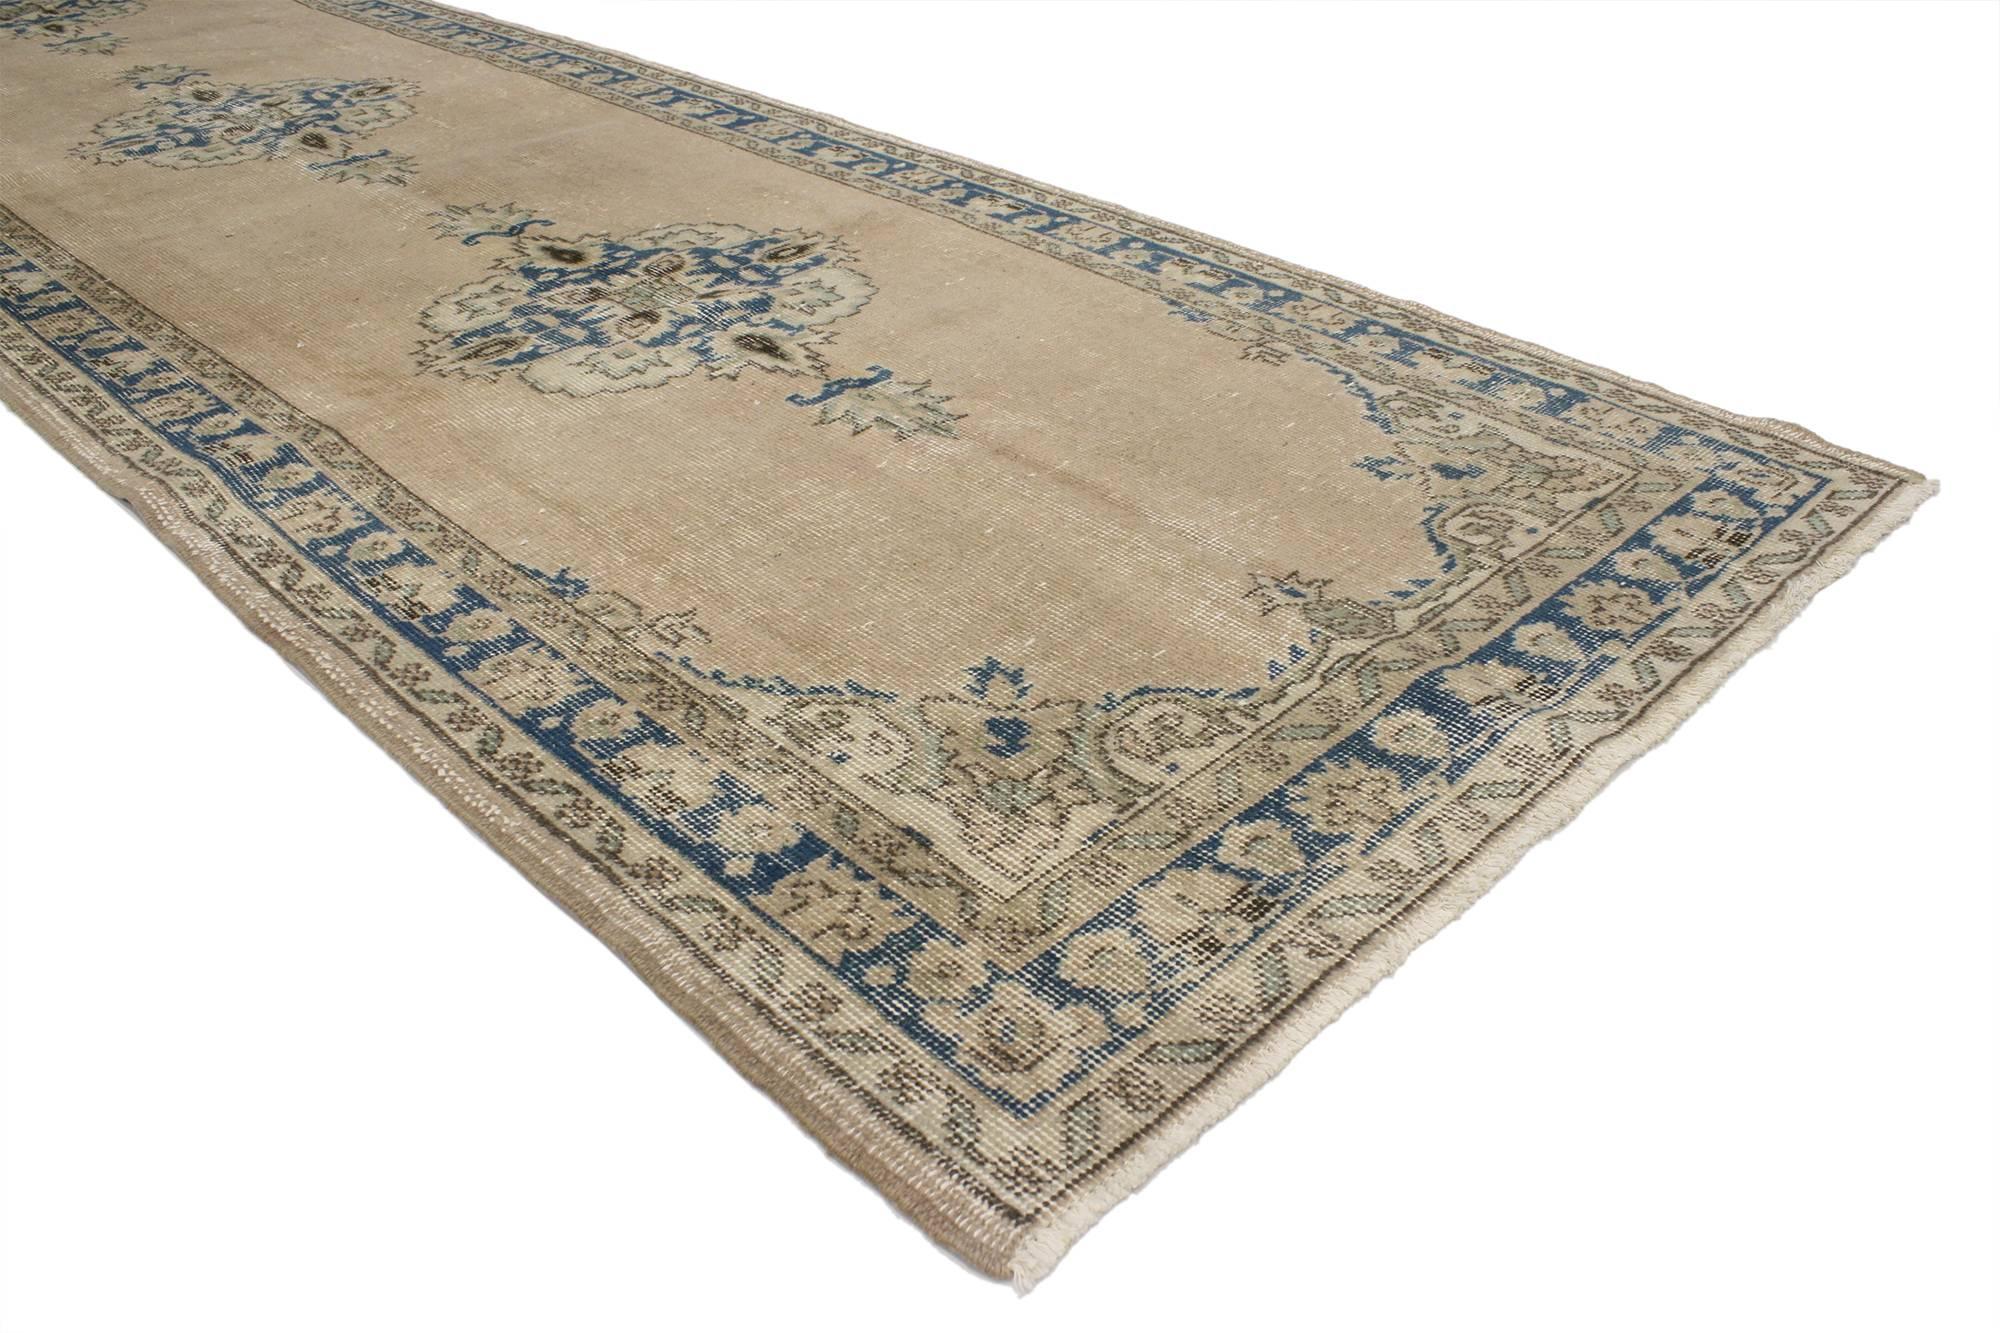 52118 Distressed Vintage Turkish Sivas Runner with Gustavian Farmhouse Style. This hand-knotted wool distressed vintage Turkish Sivas runner features three stylized medallions patterned and anchored with blooming palmettes. It is framed with